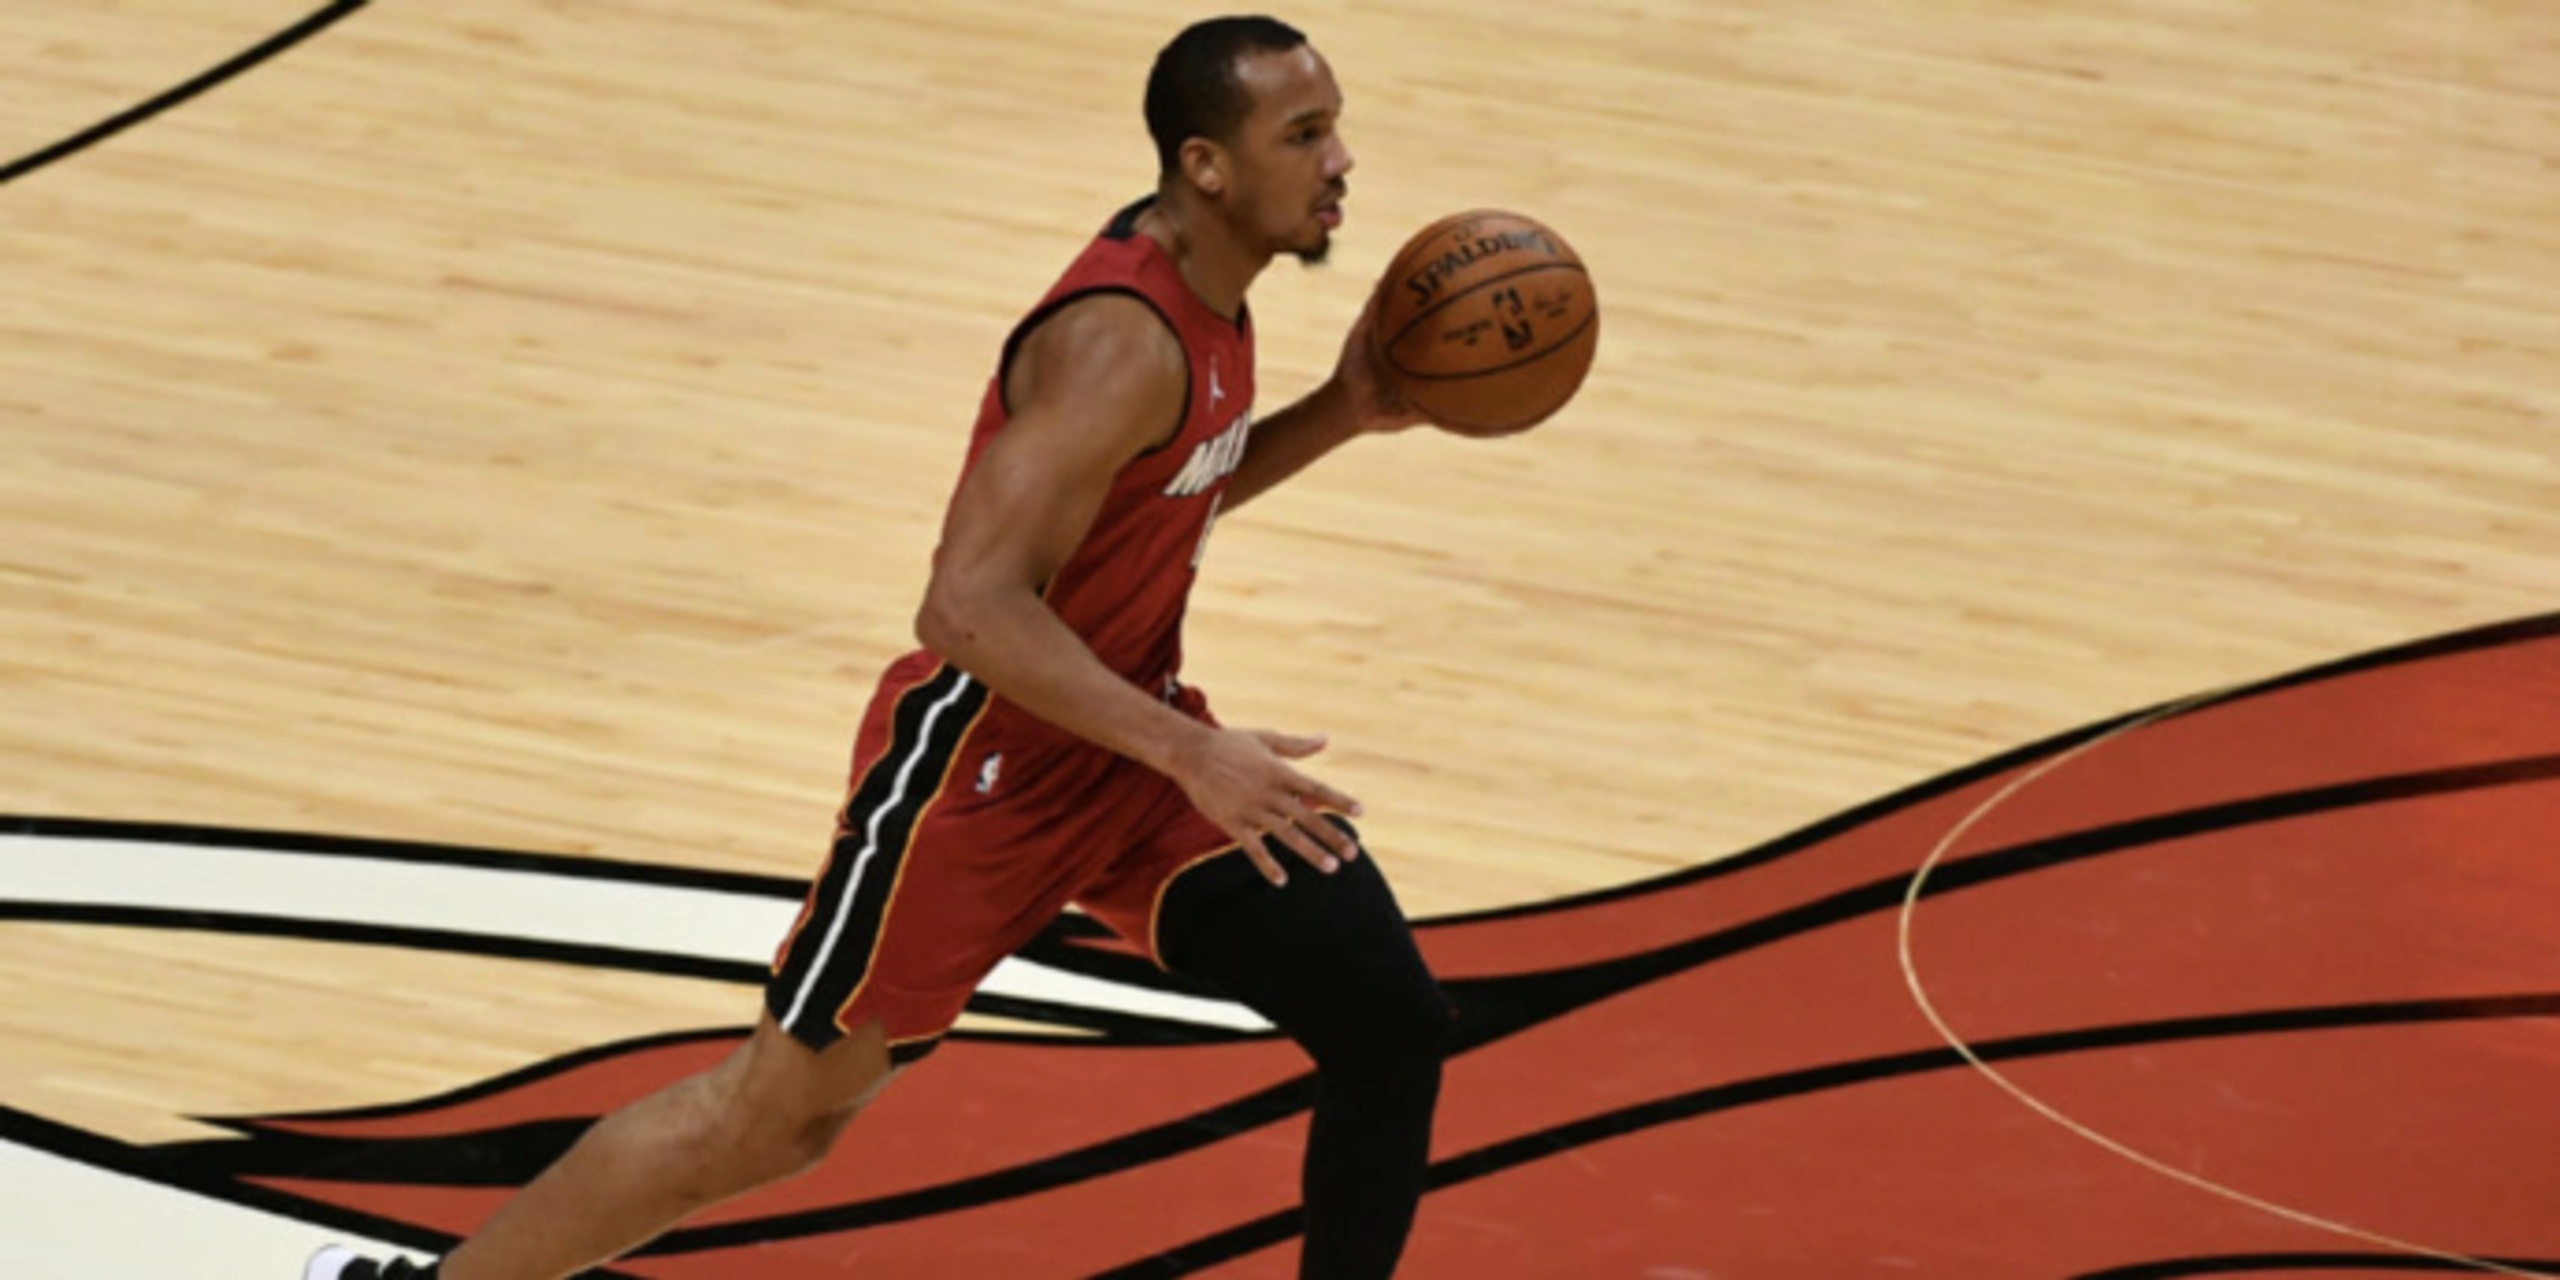 Miami Heat guard Avery Bradley to miss 3-4 weeks with calf injury